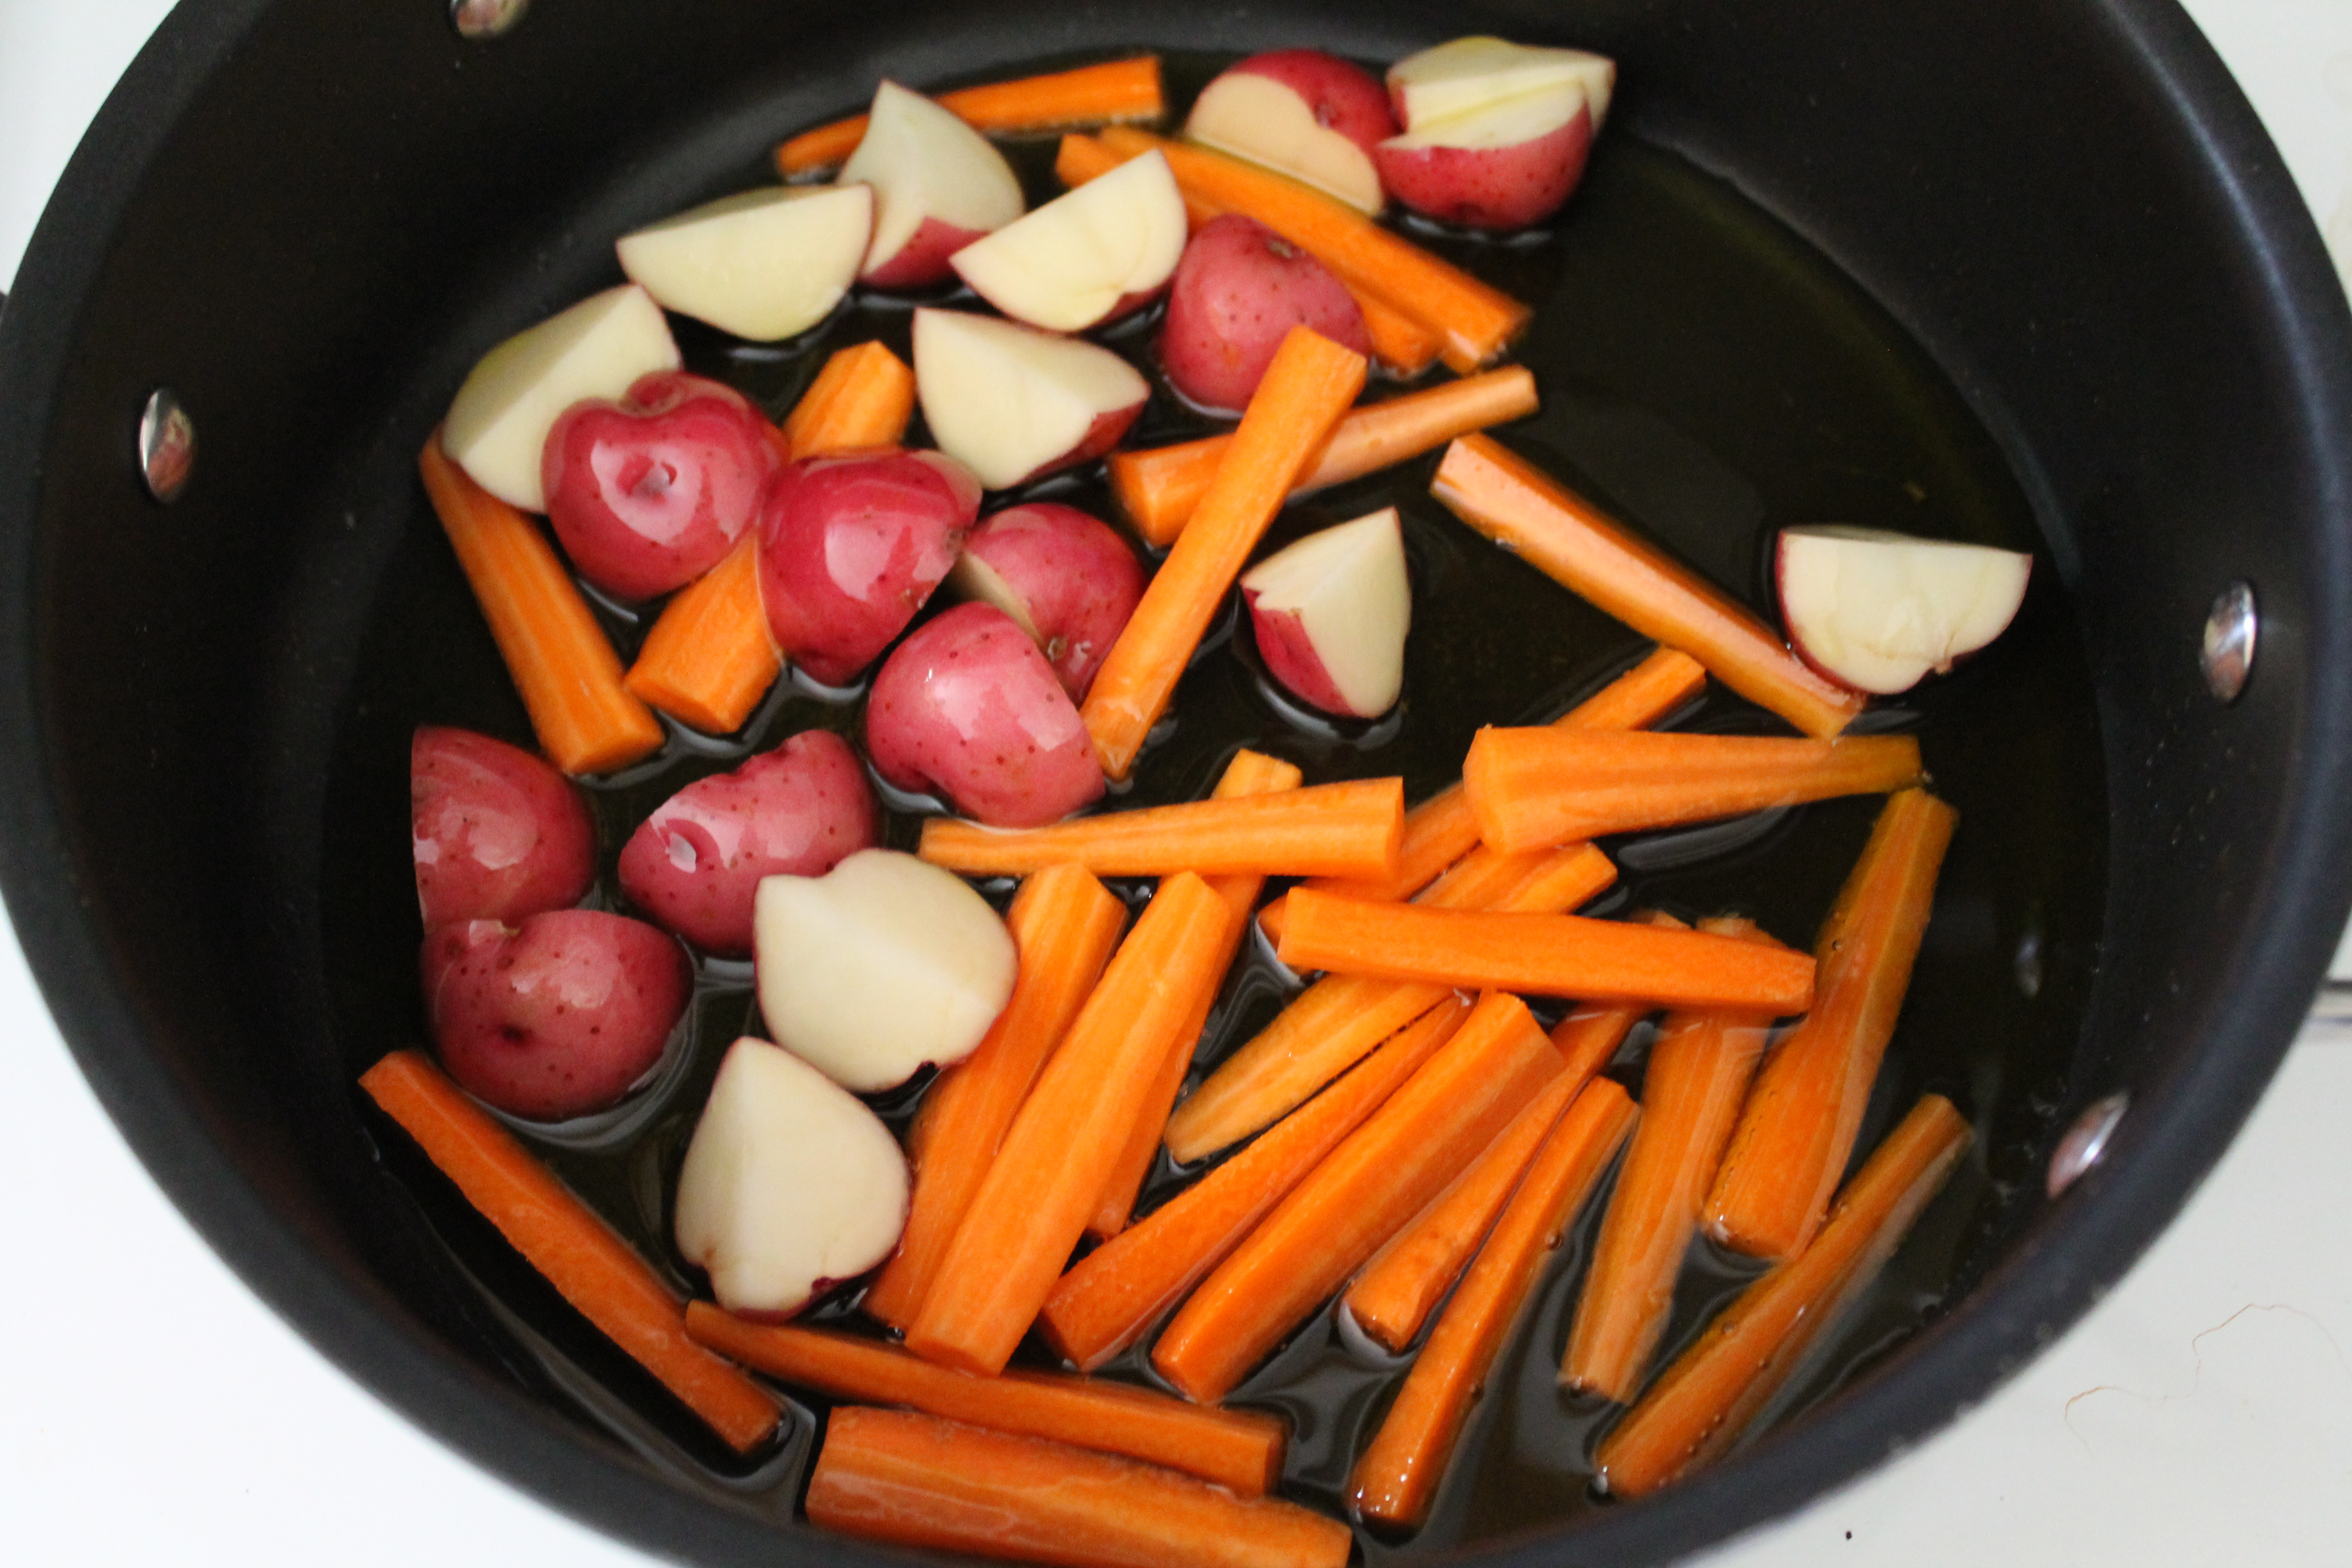 Carrots and Potatoes